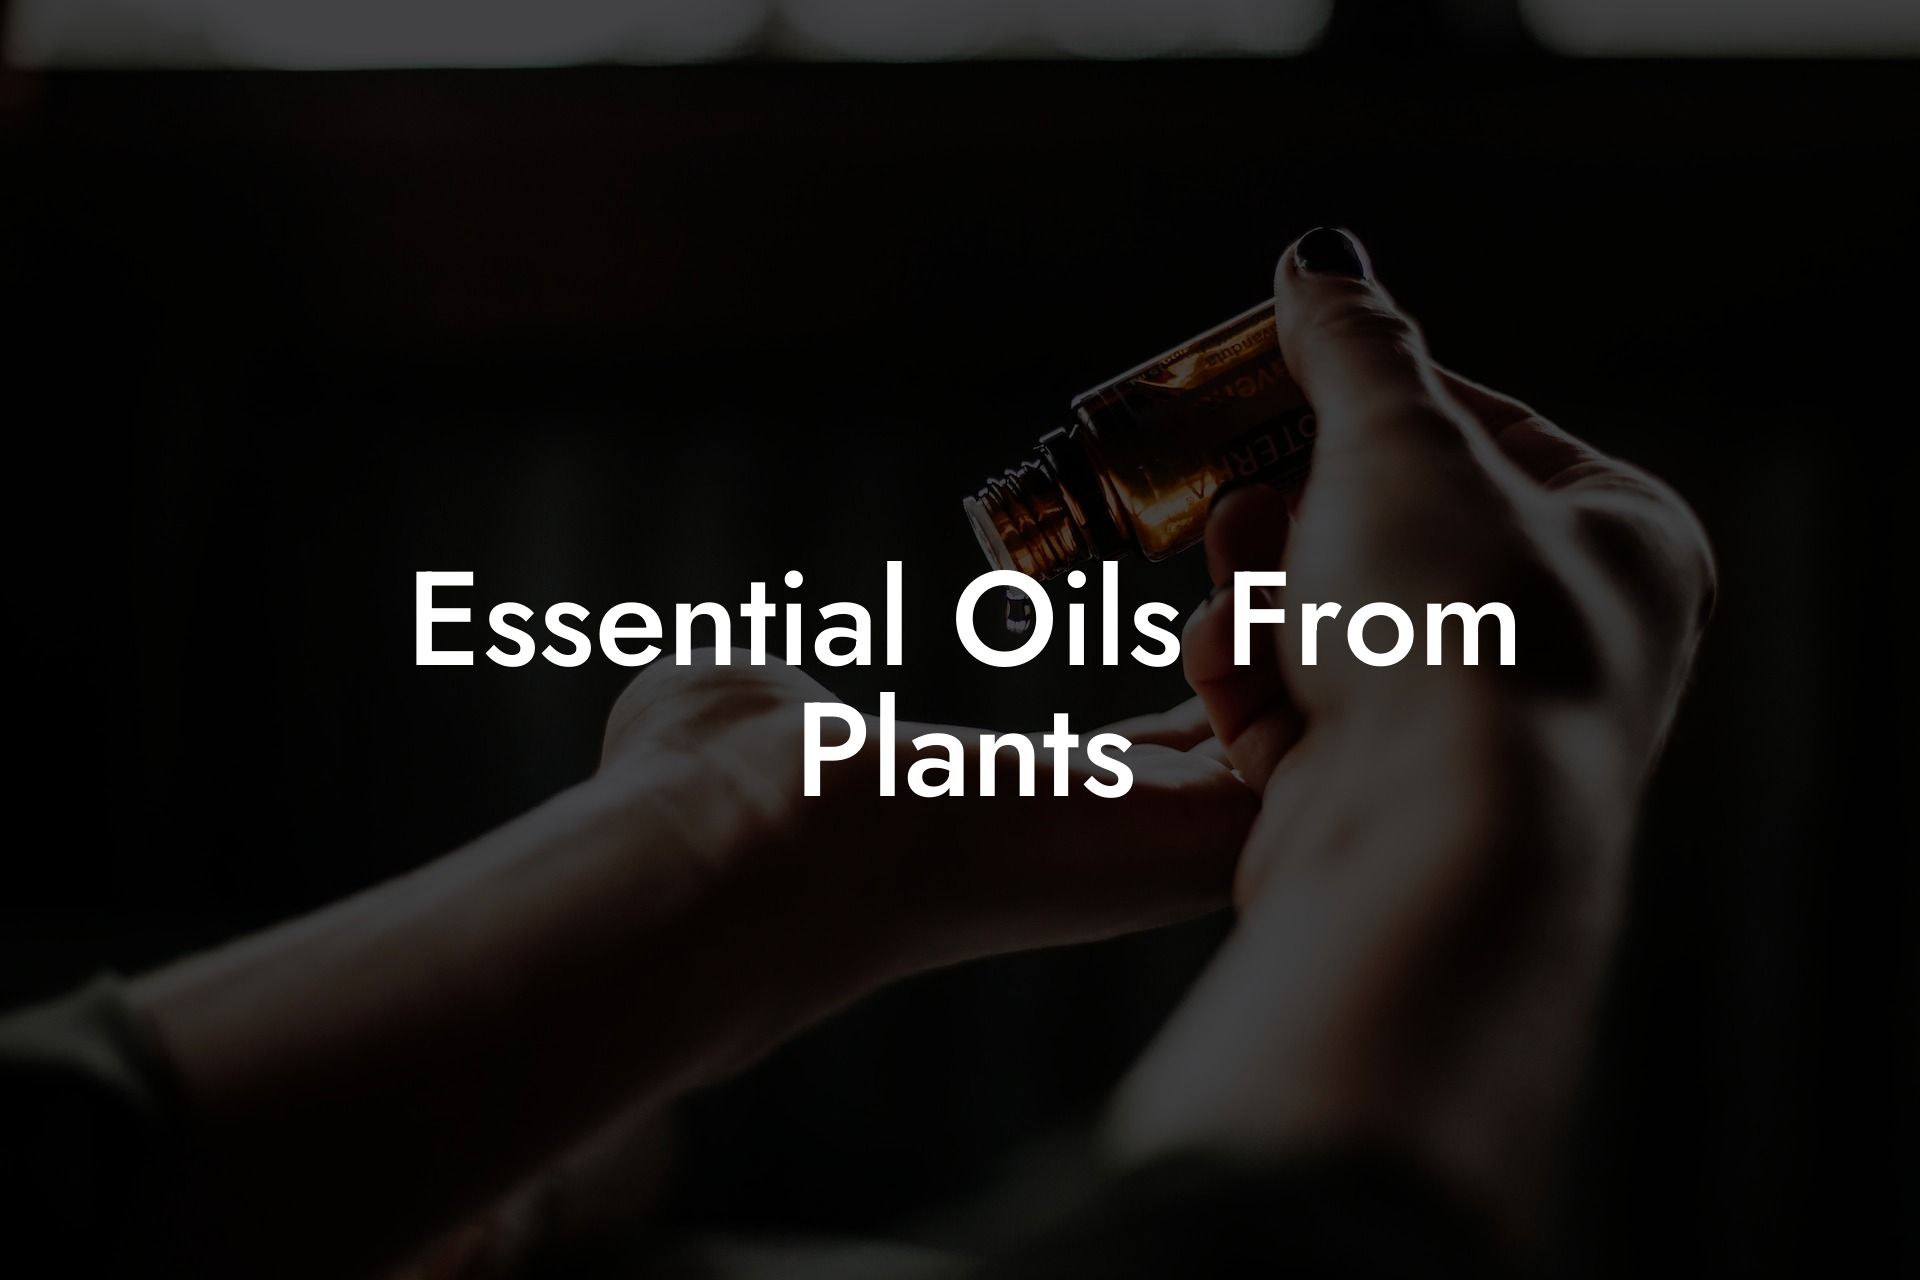 Essential Oils From Plants